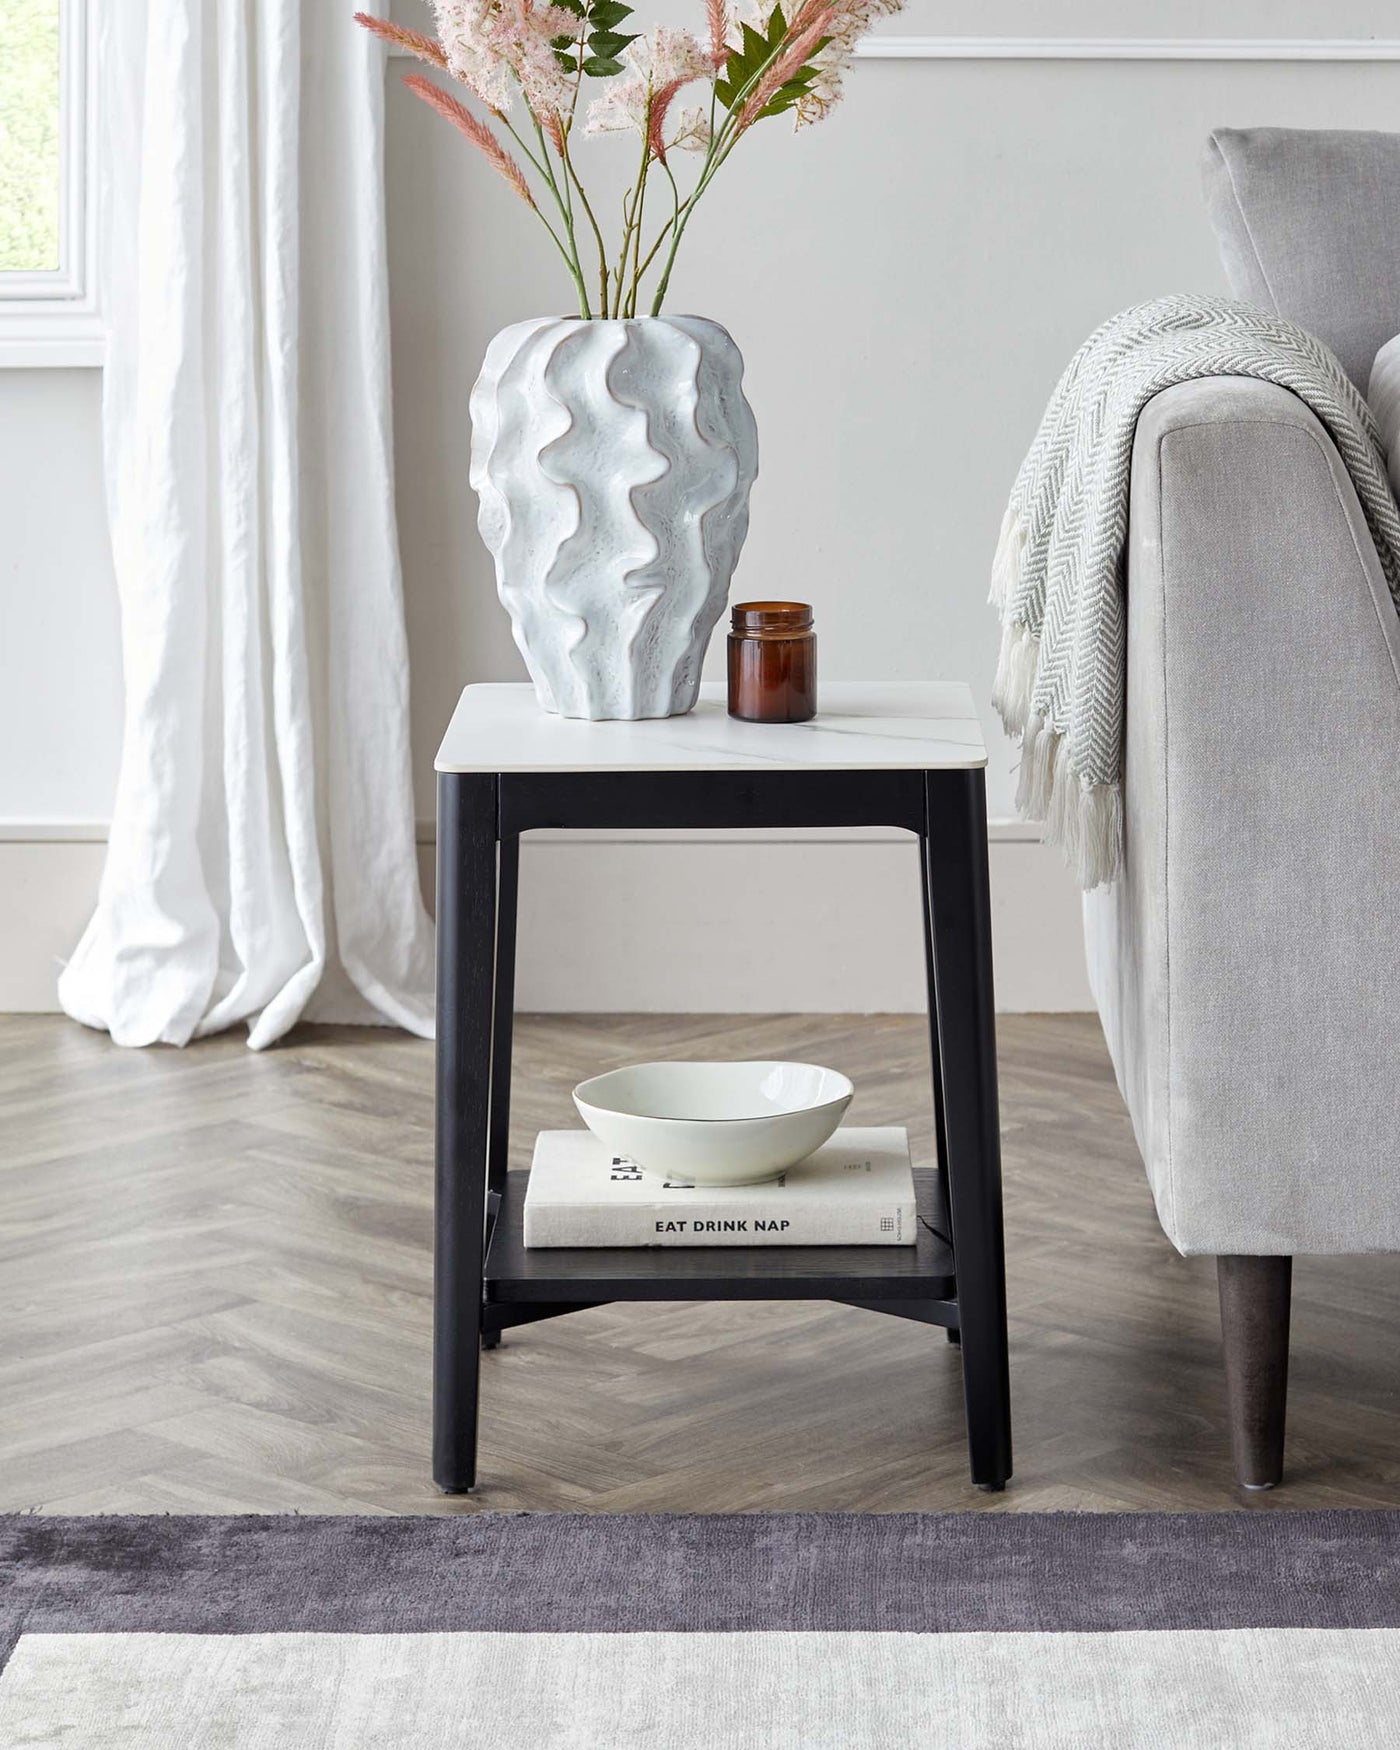 Banks White Marbled Ceramic With Black Wood Side Table